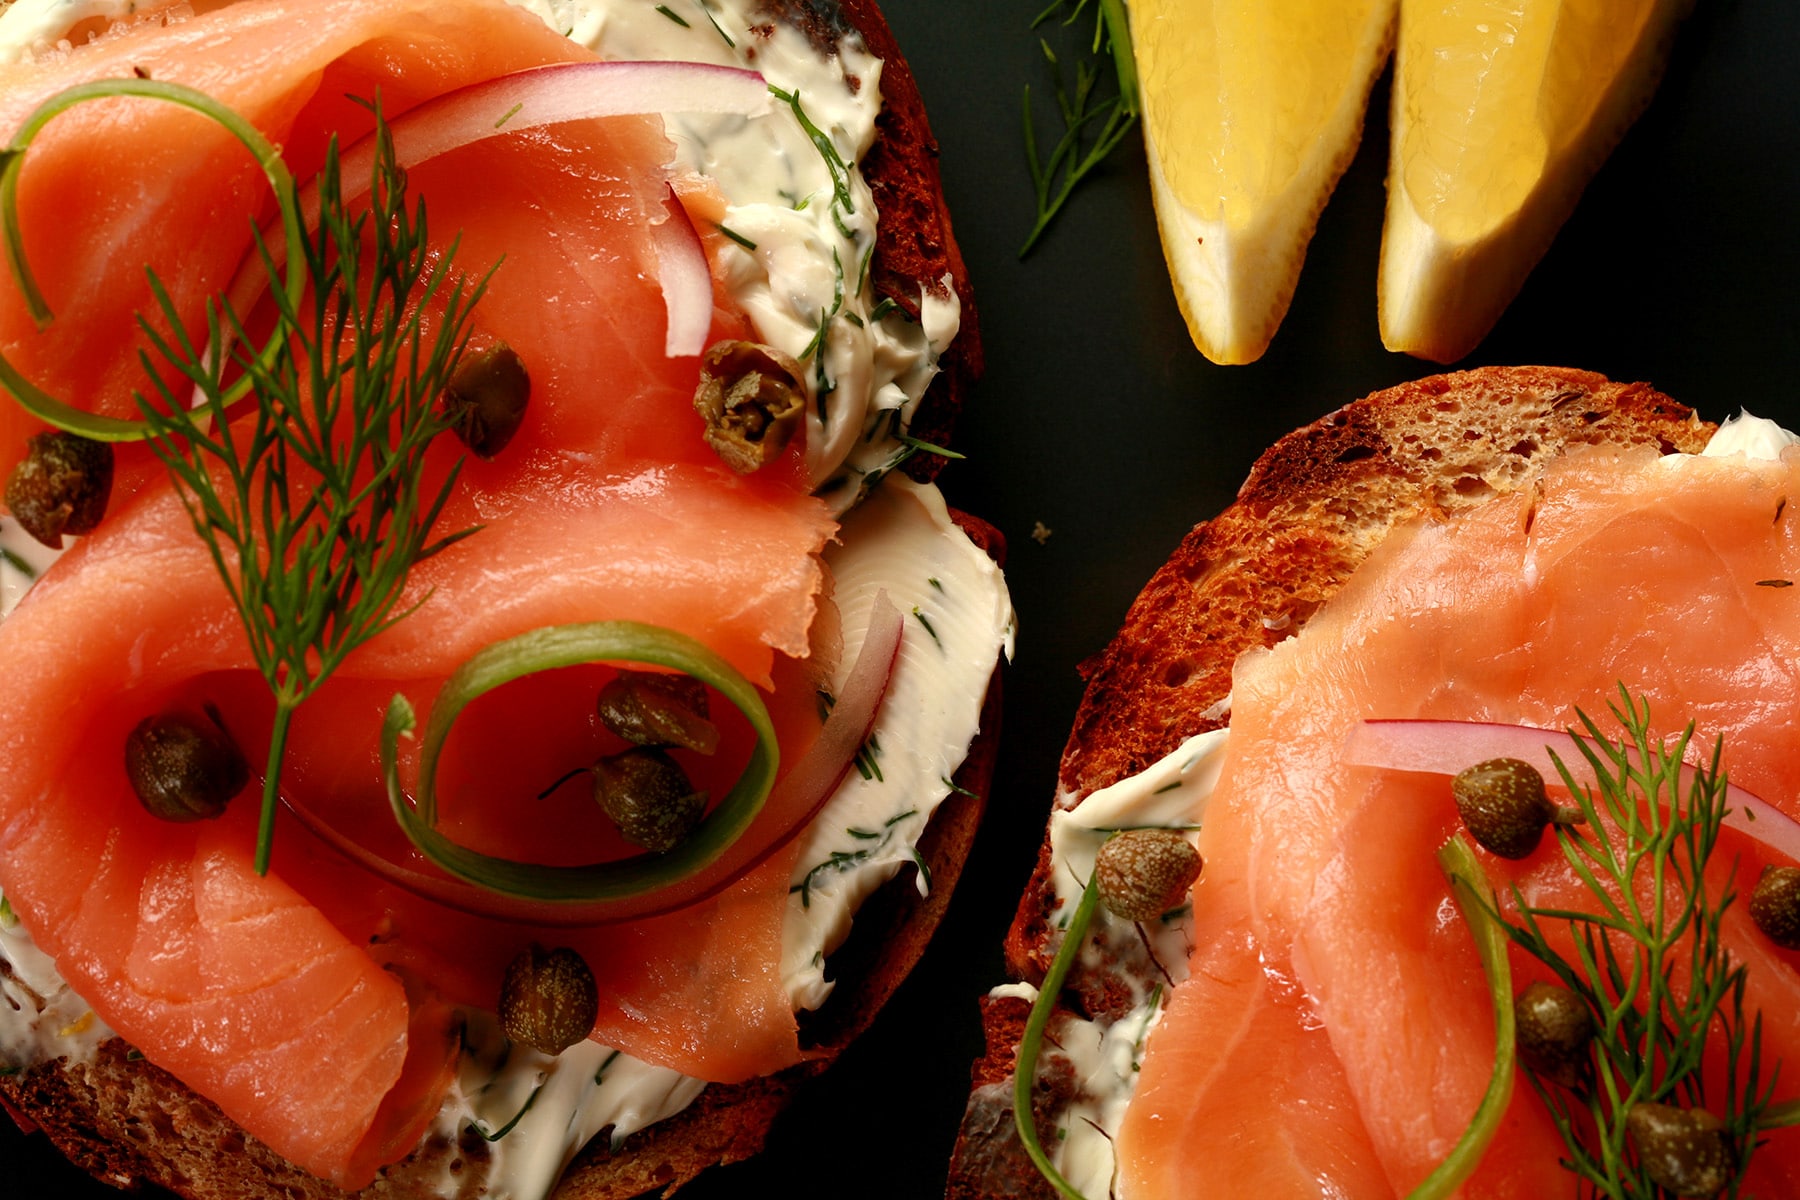 A toasted bagel open face sandwich with smoked salmon, cream cheese, capers, and onions.